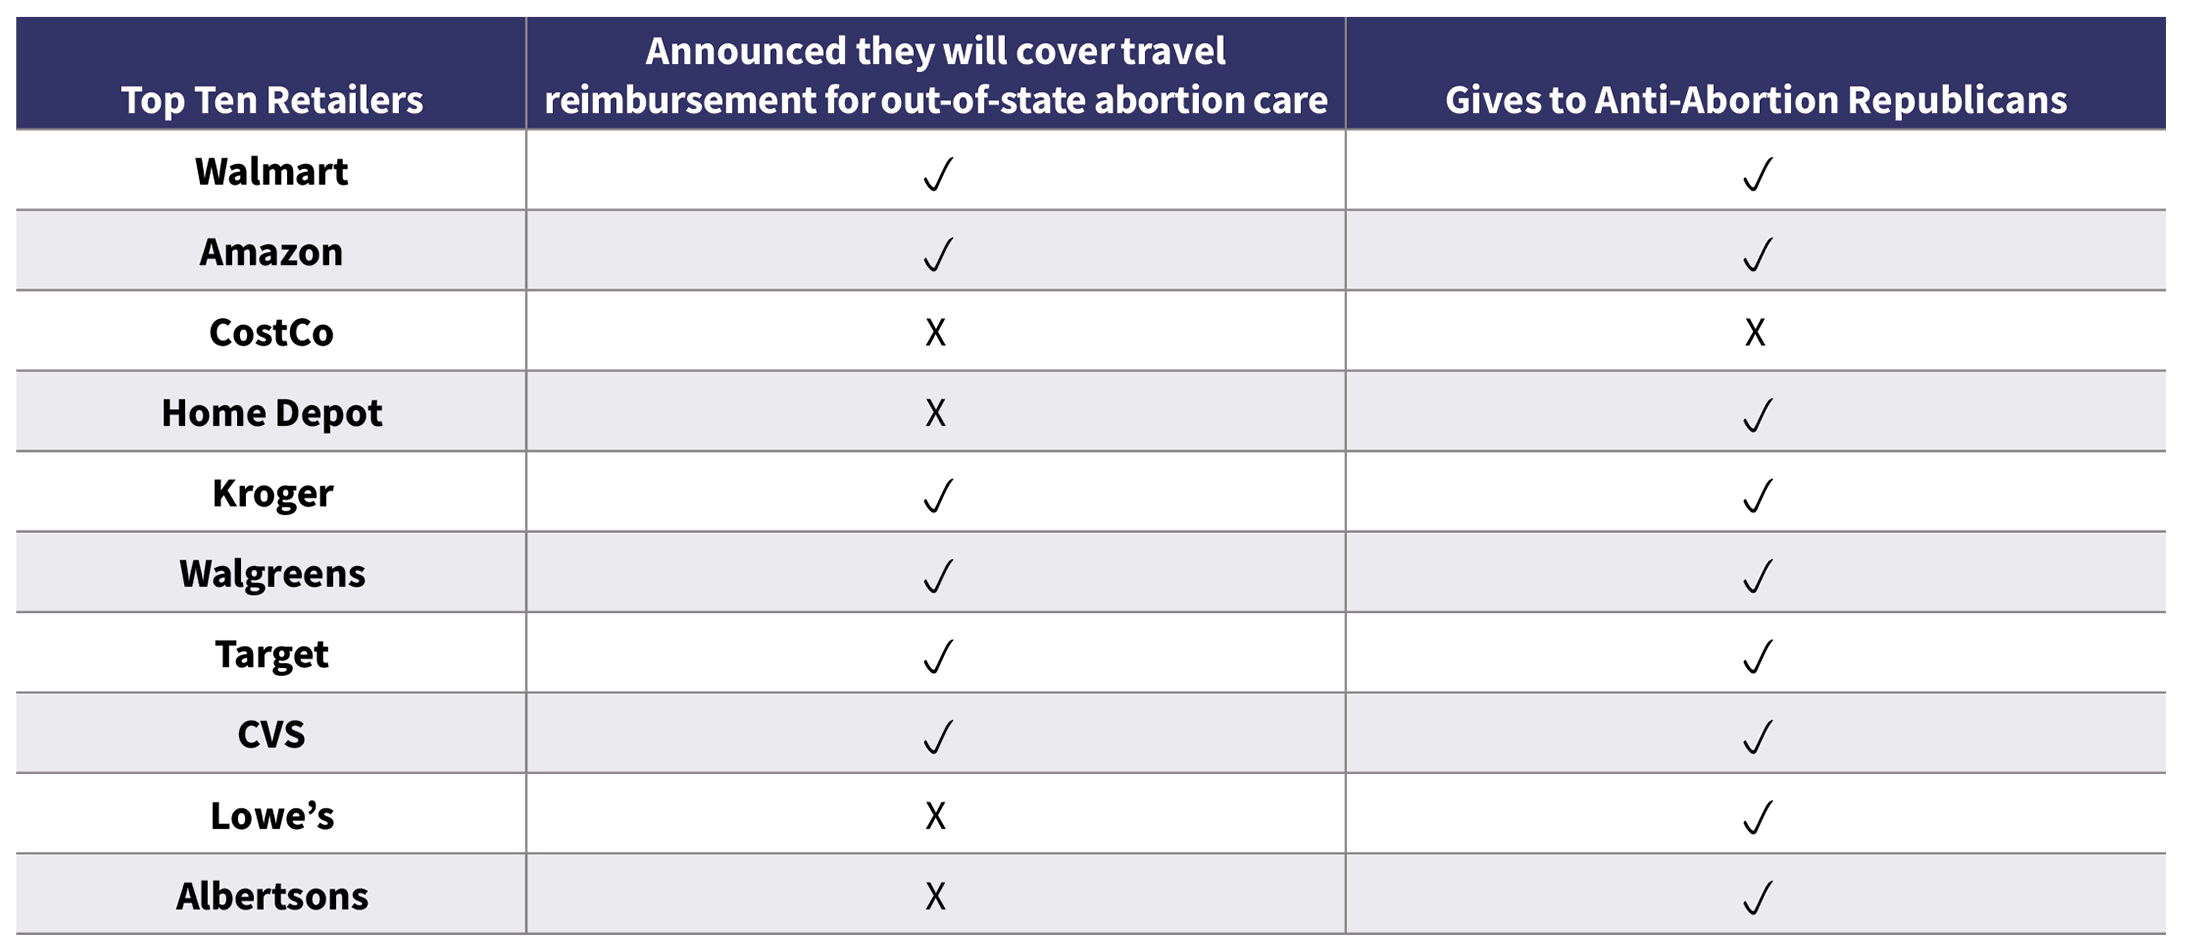 Chart breaks down which retailers have announced they will cover travel reimbursement for out-of-state care (all of the top 10 except Costco, HomeDepot, Lowe's, and Albertson's) and which have given to anti-abortion Republicans (all but Costco have made these donations)